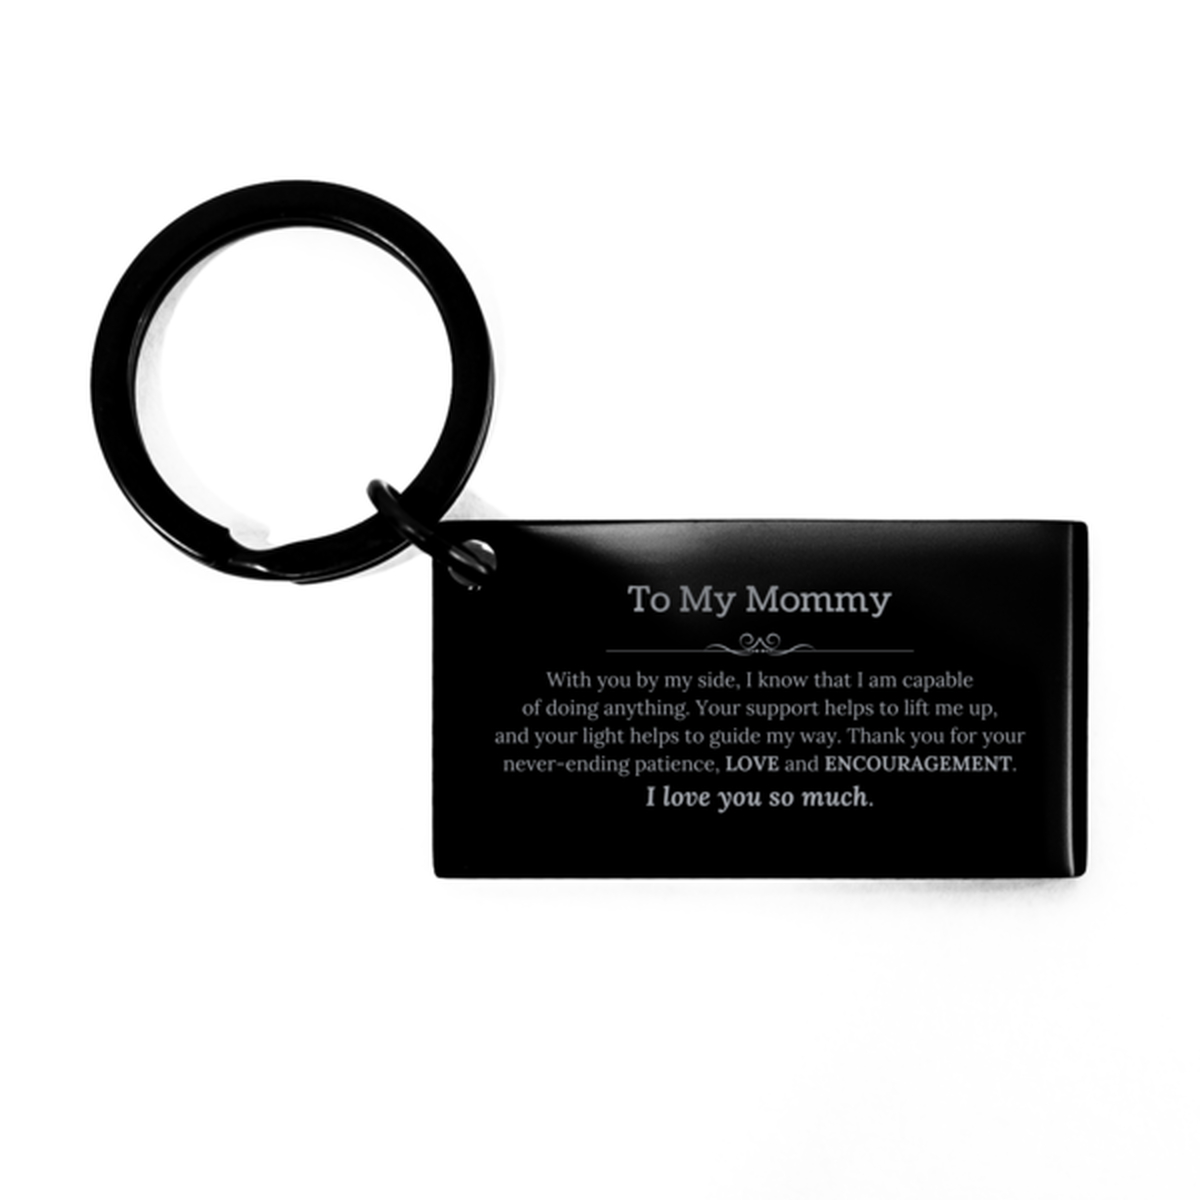 Appreciation Mommy Keychain Gifts, To My Mommy Birthday Christmas Wedding Keepsake Gifts for Mommy With you by my side, I know that I am capable of doing anything. I love you so much